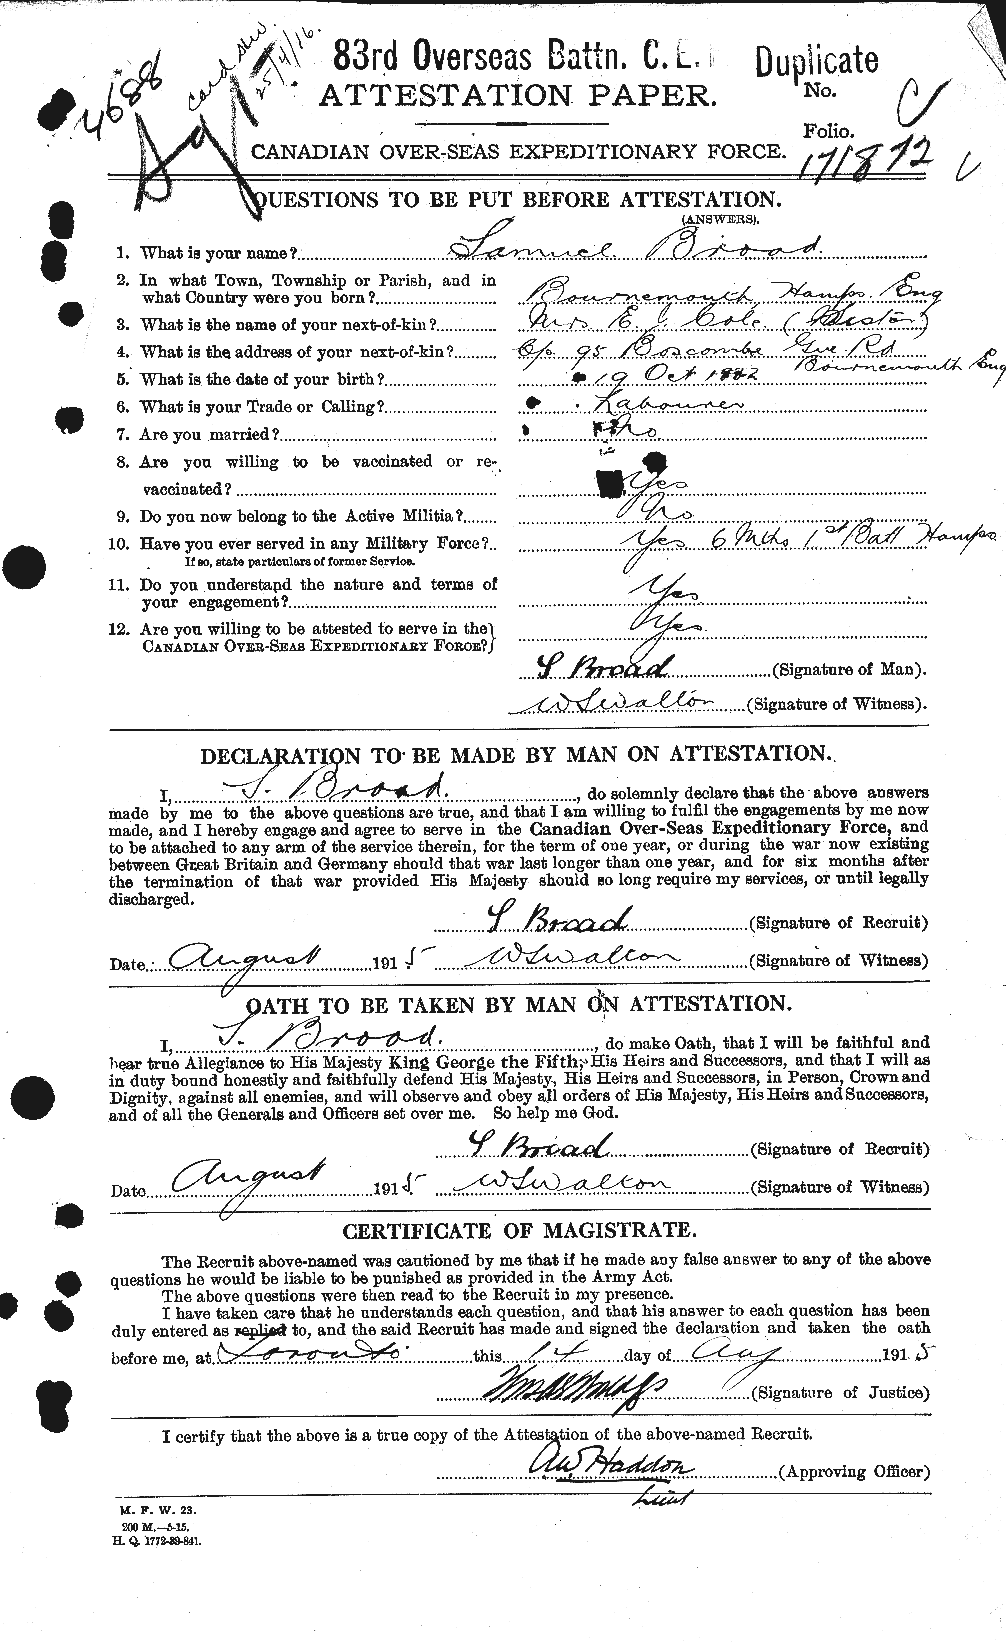 Personnel Records of the First World War - CEF 262923a